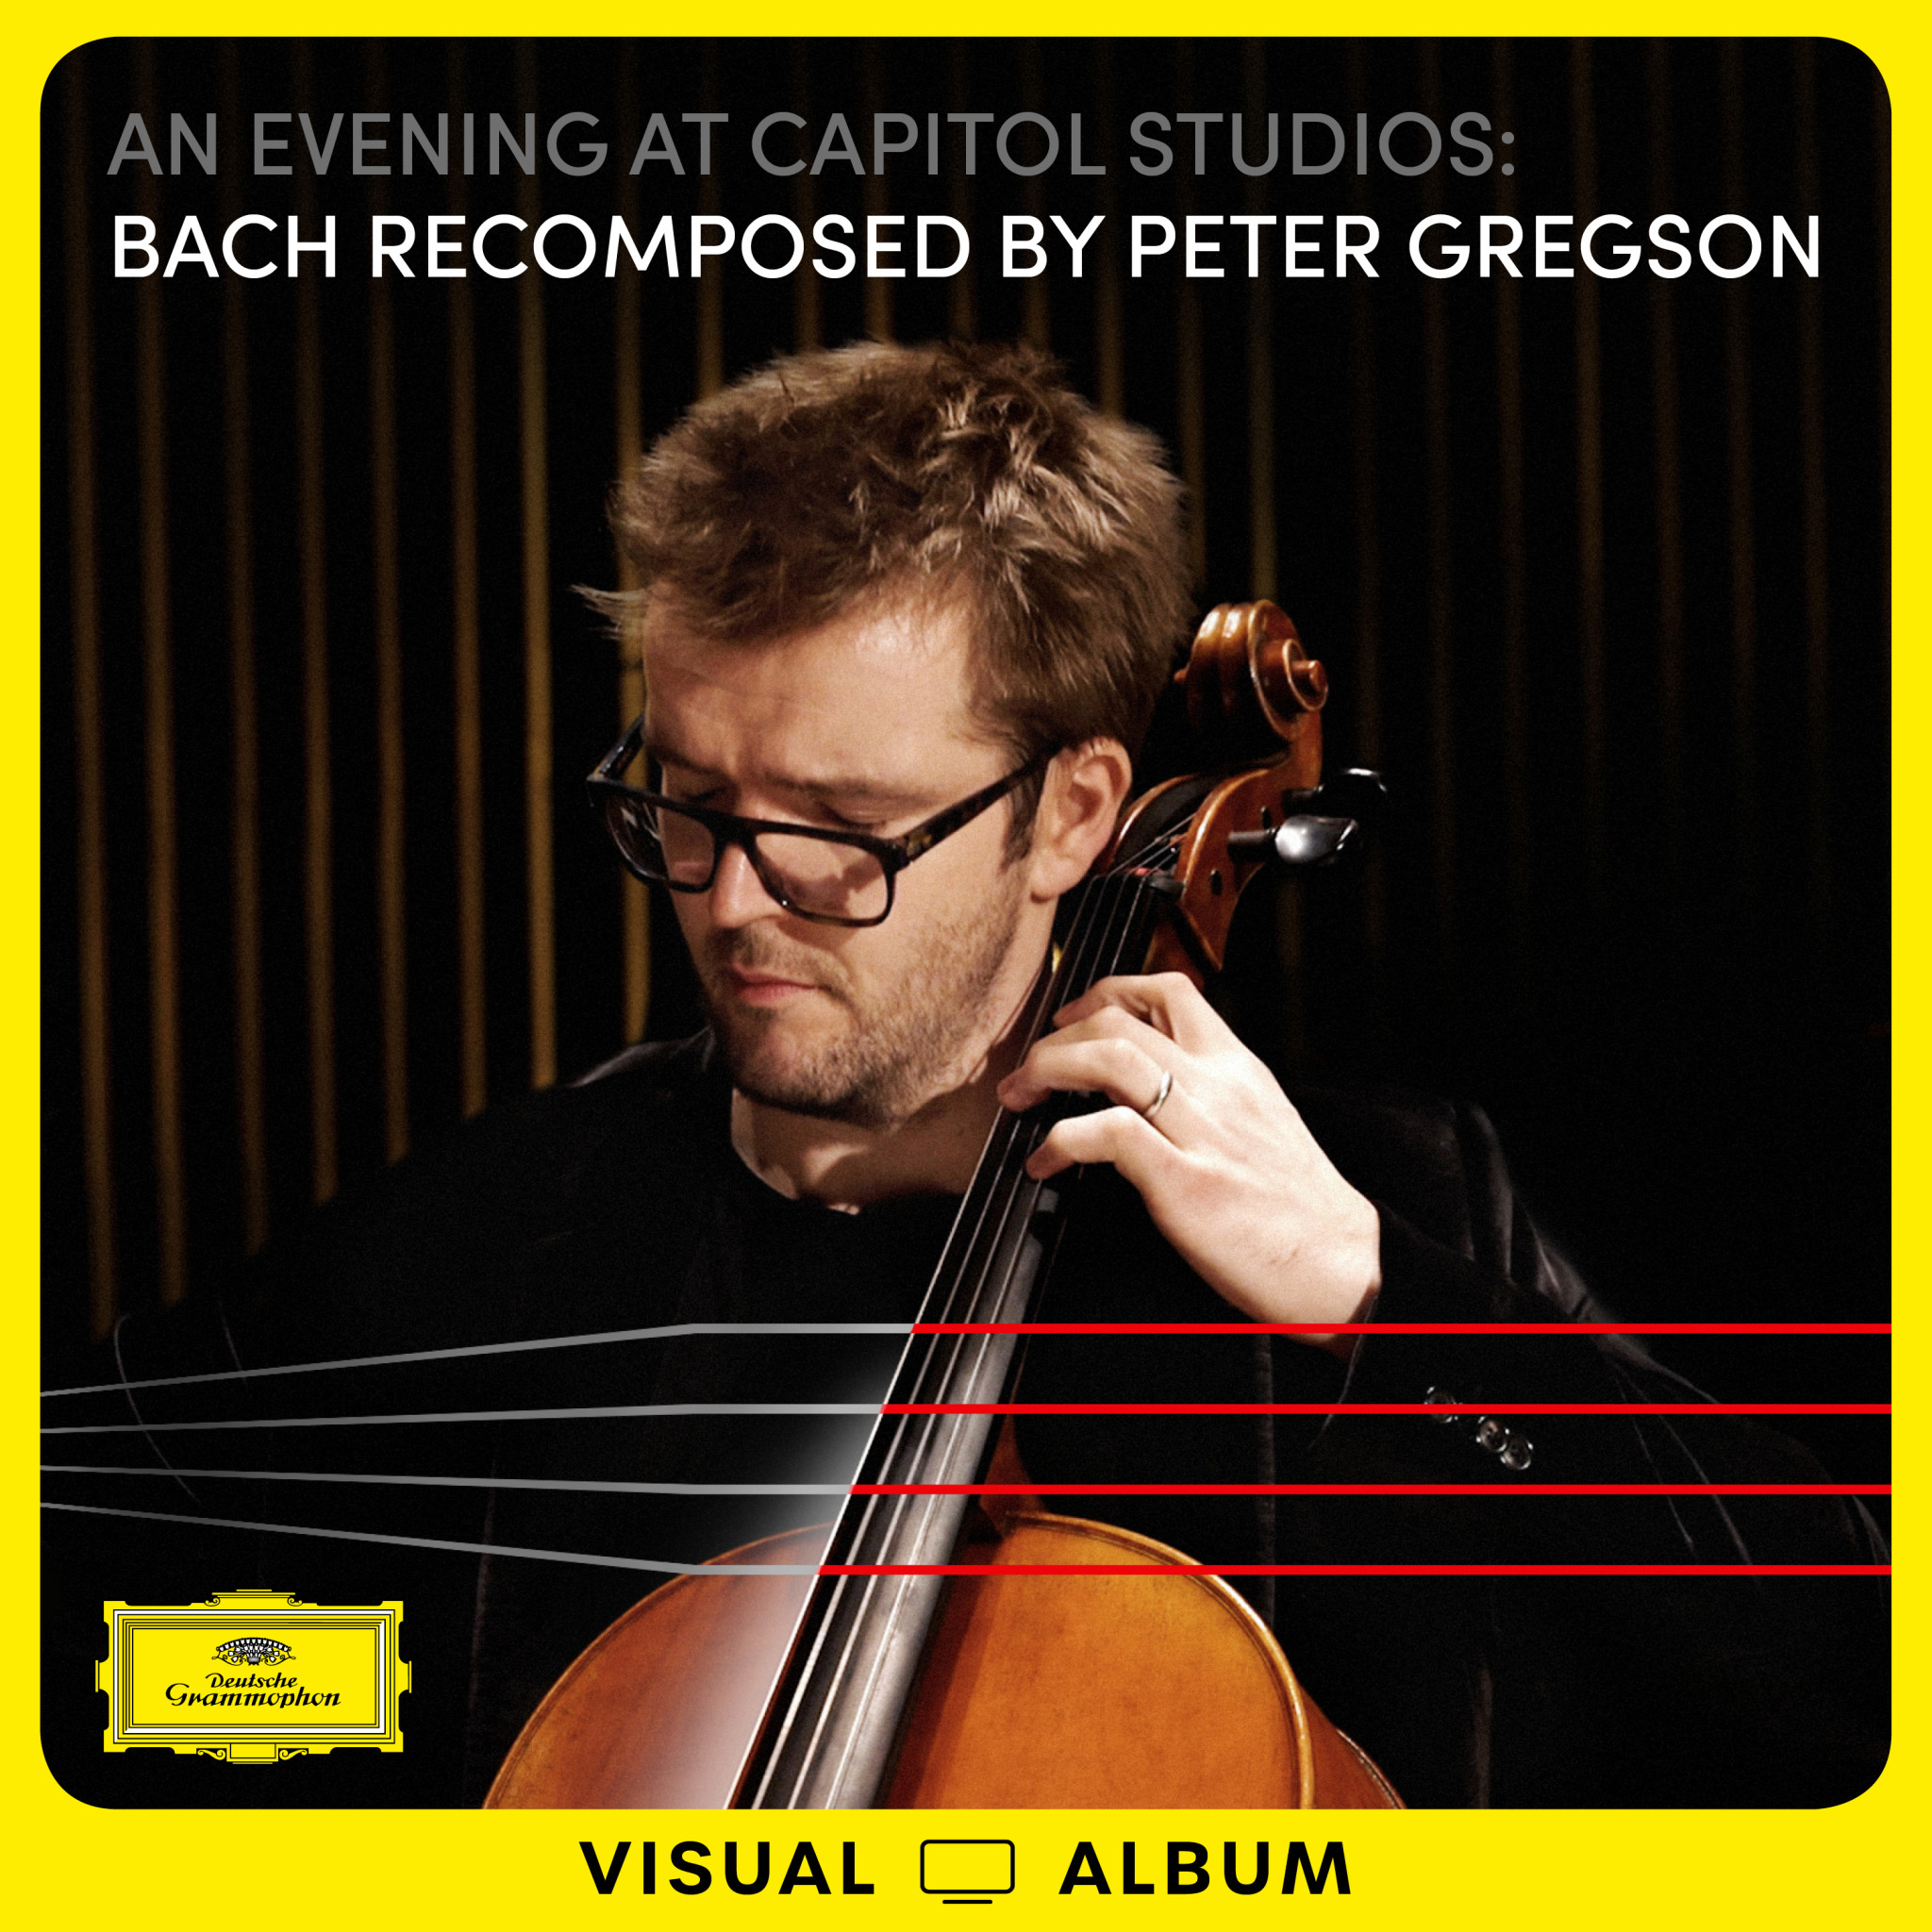 AN EVENING AT CAPITOL STUDIOS: Bach Recomposed / Peter Gregson (Visual Album) Cover